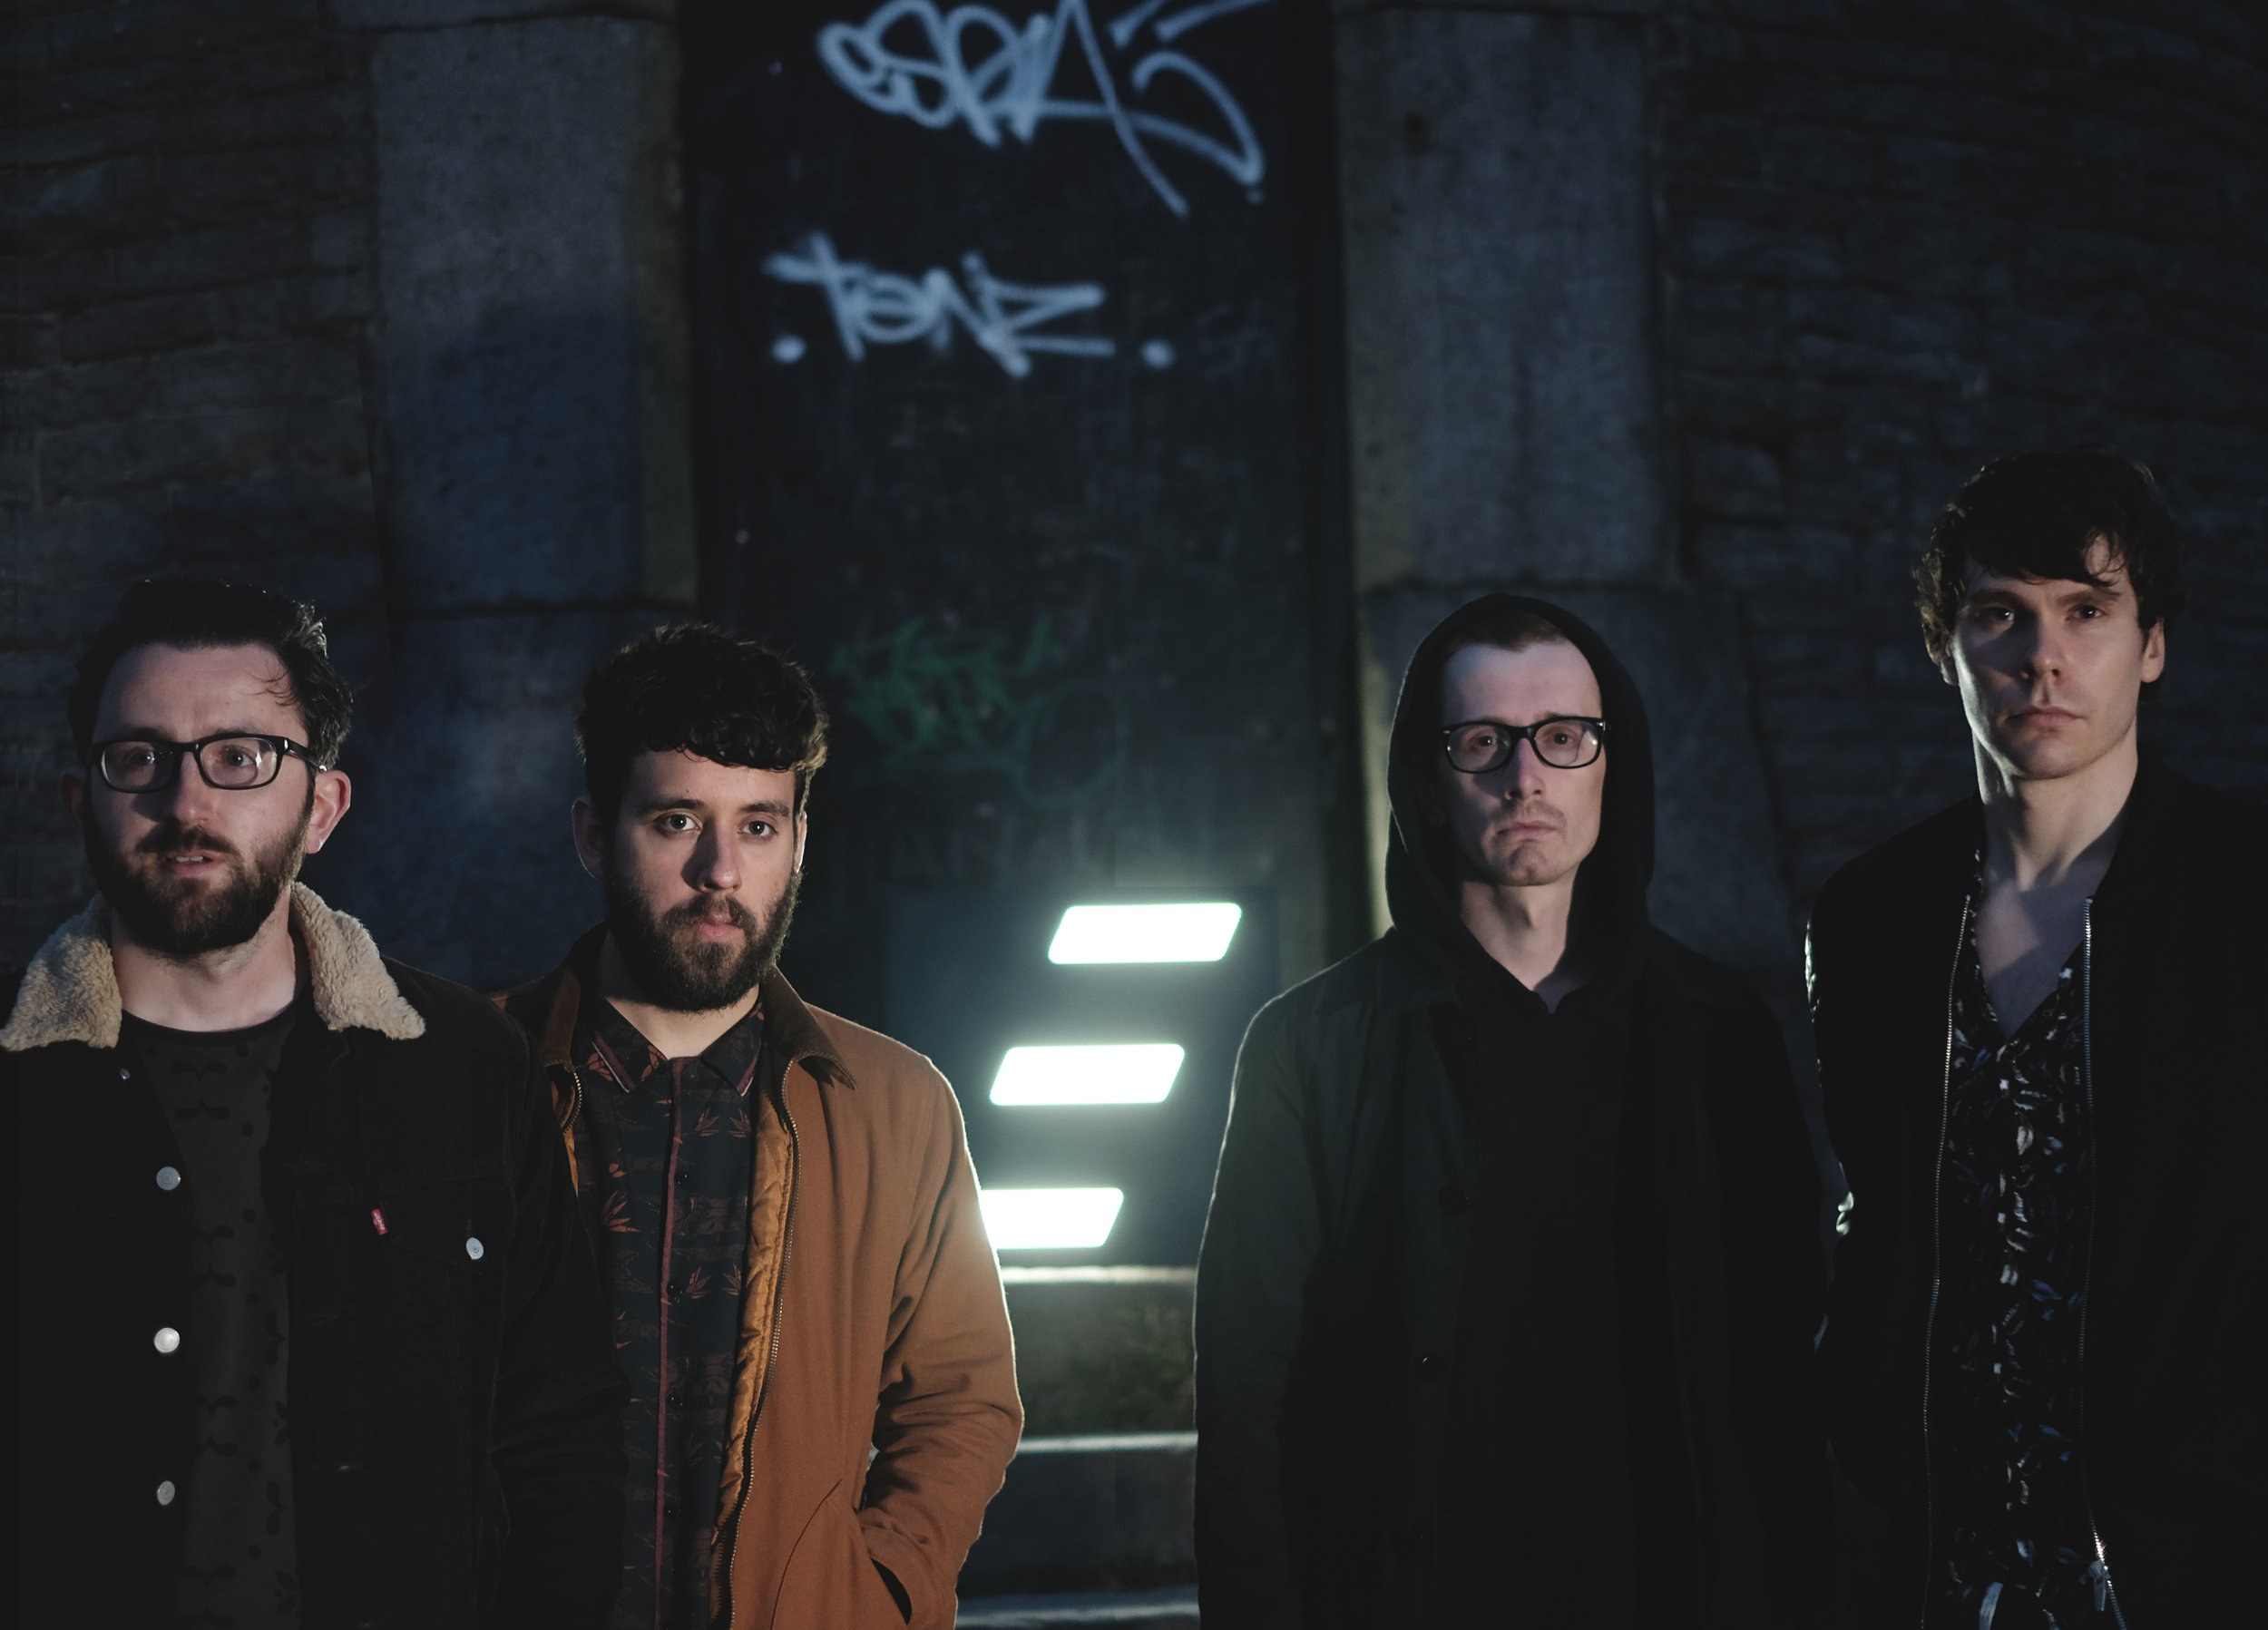 Embers share huge new single 'Until The Dawn' with live video